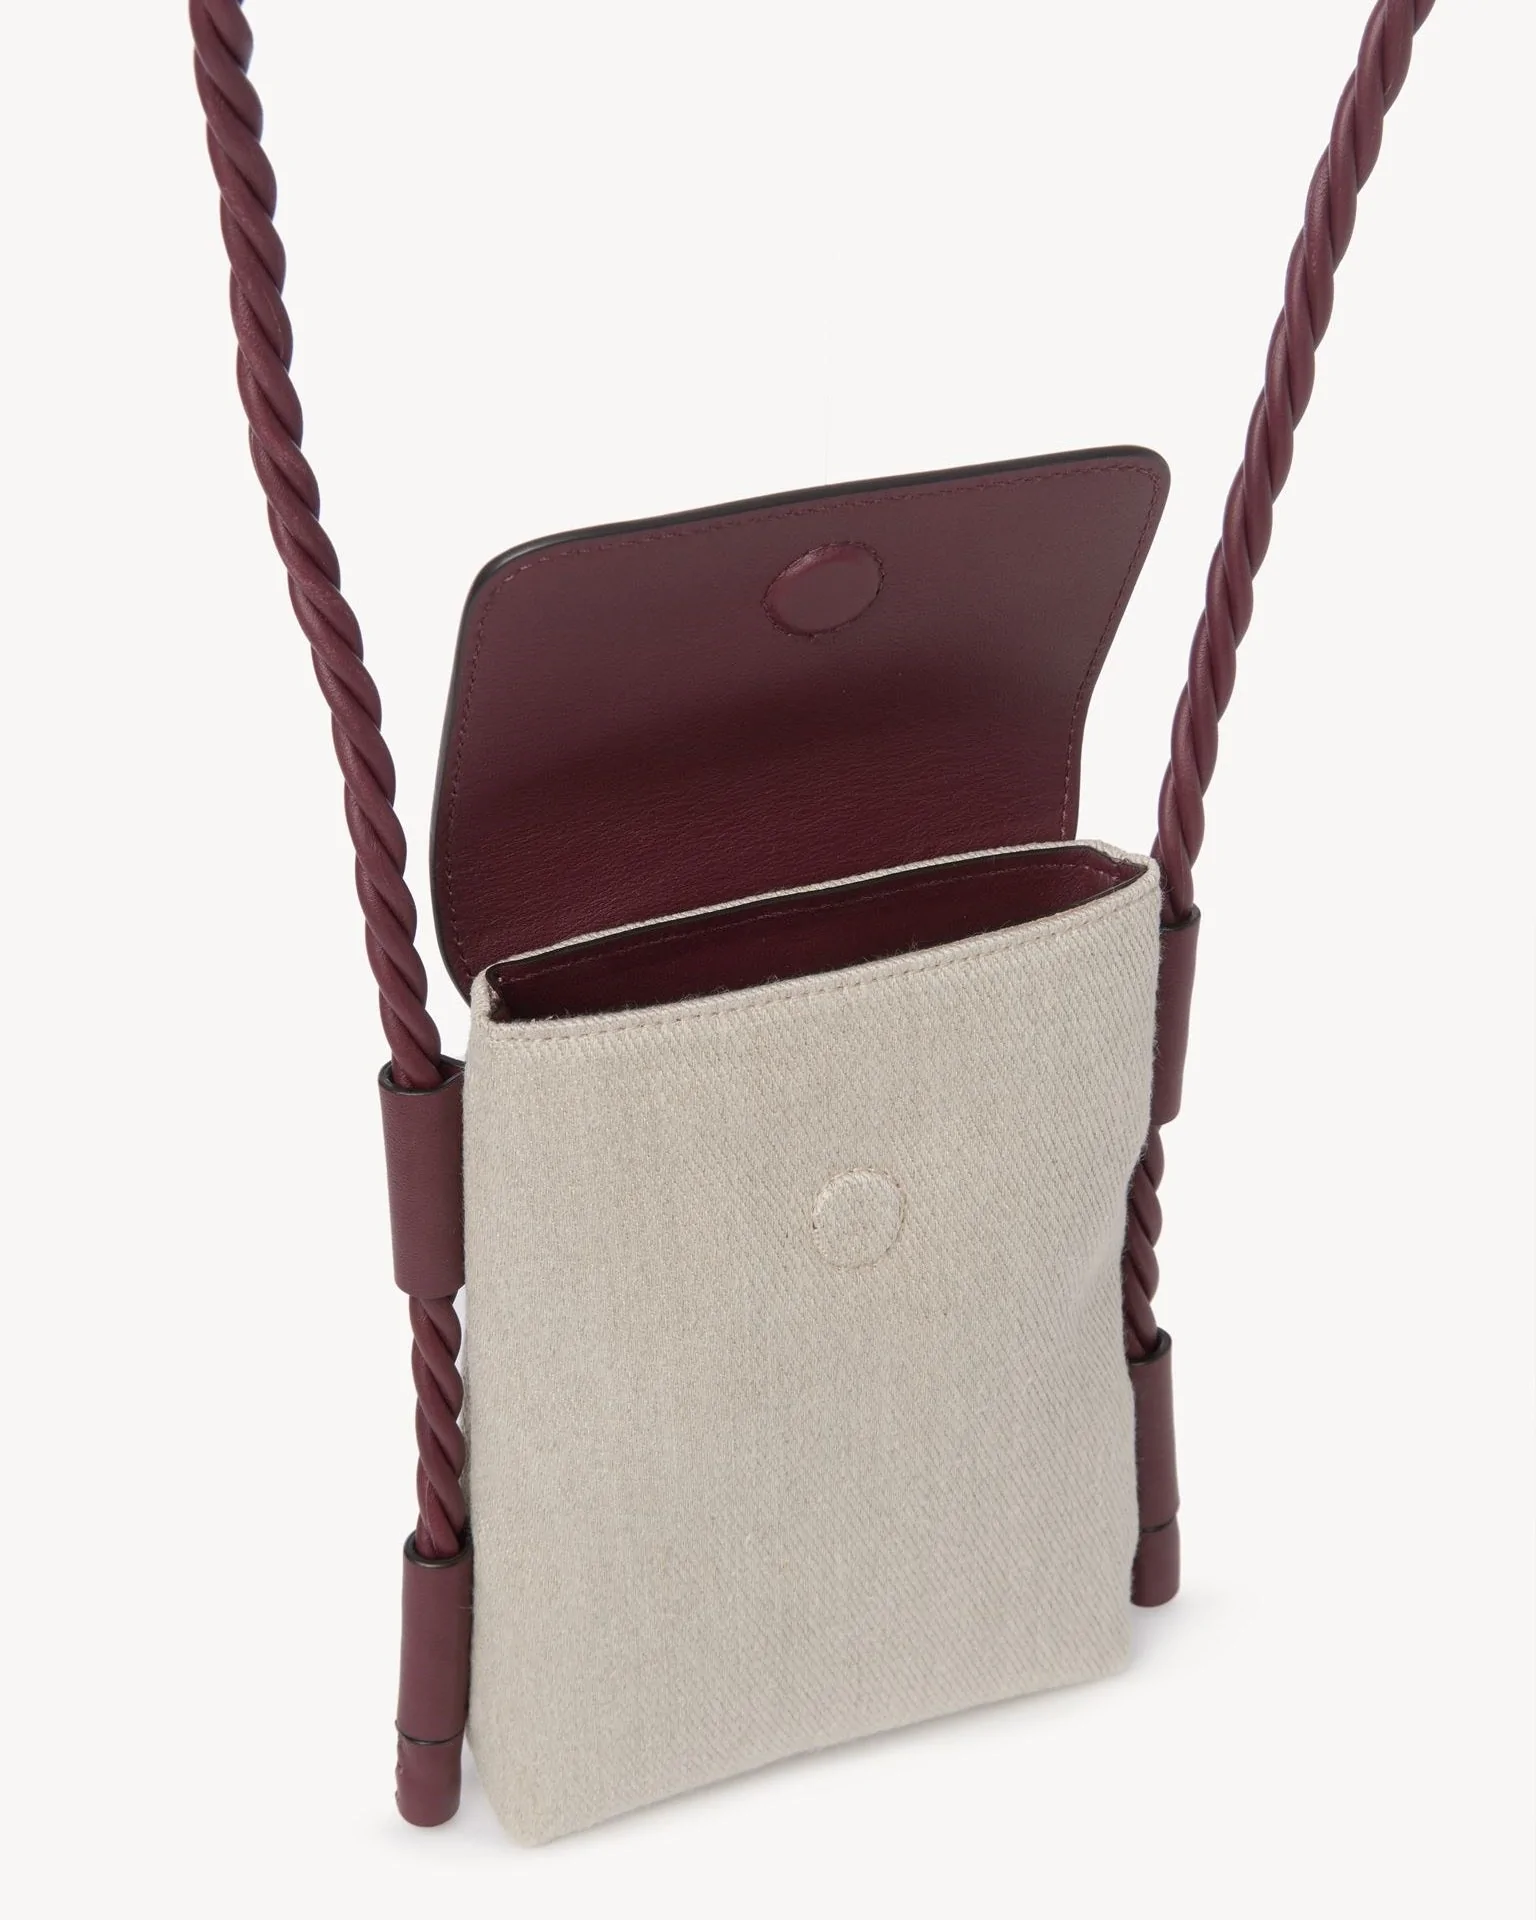 Chloe Key Phone Pouch With Flap In Linen & Shiny Calfskin